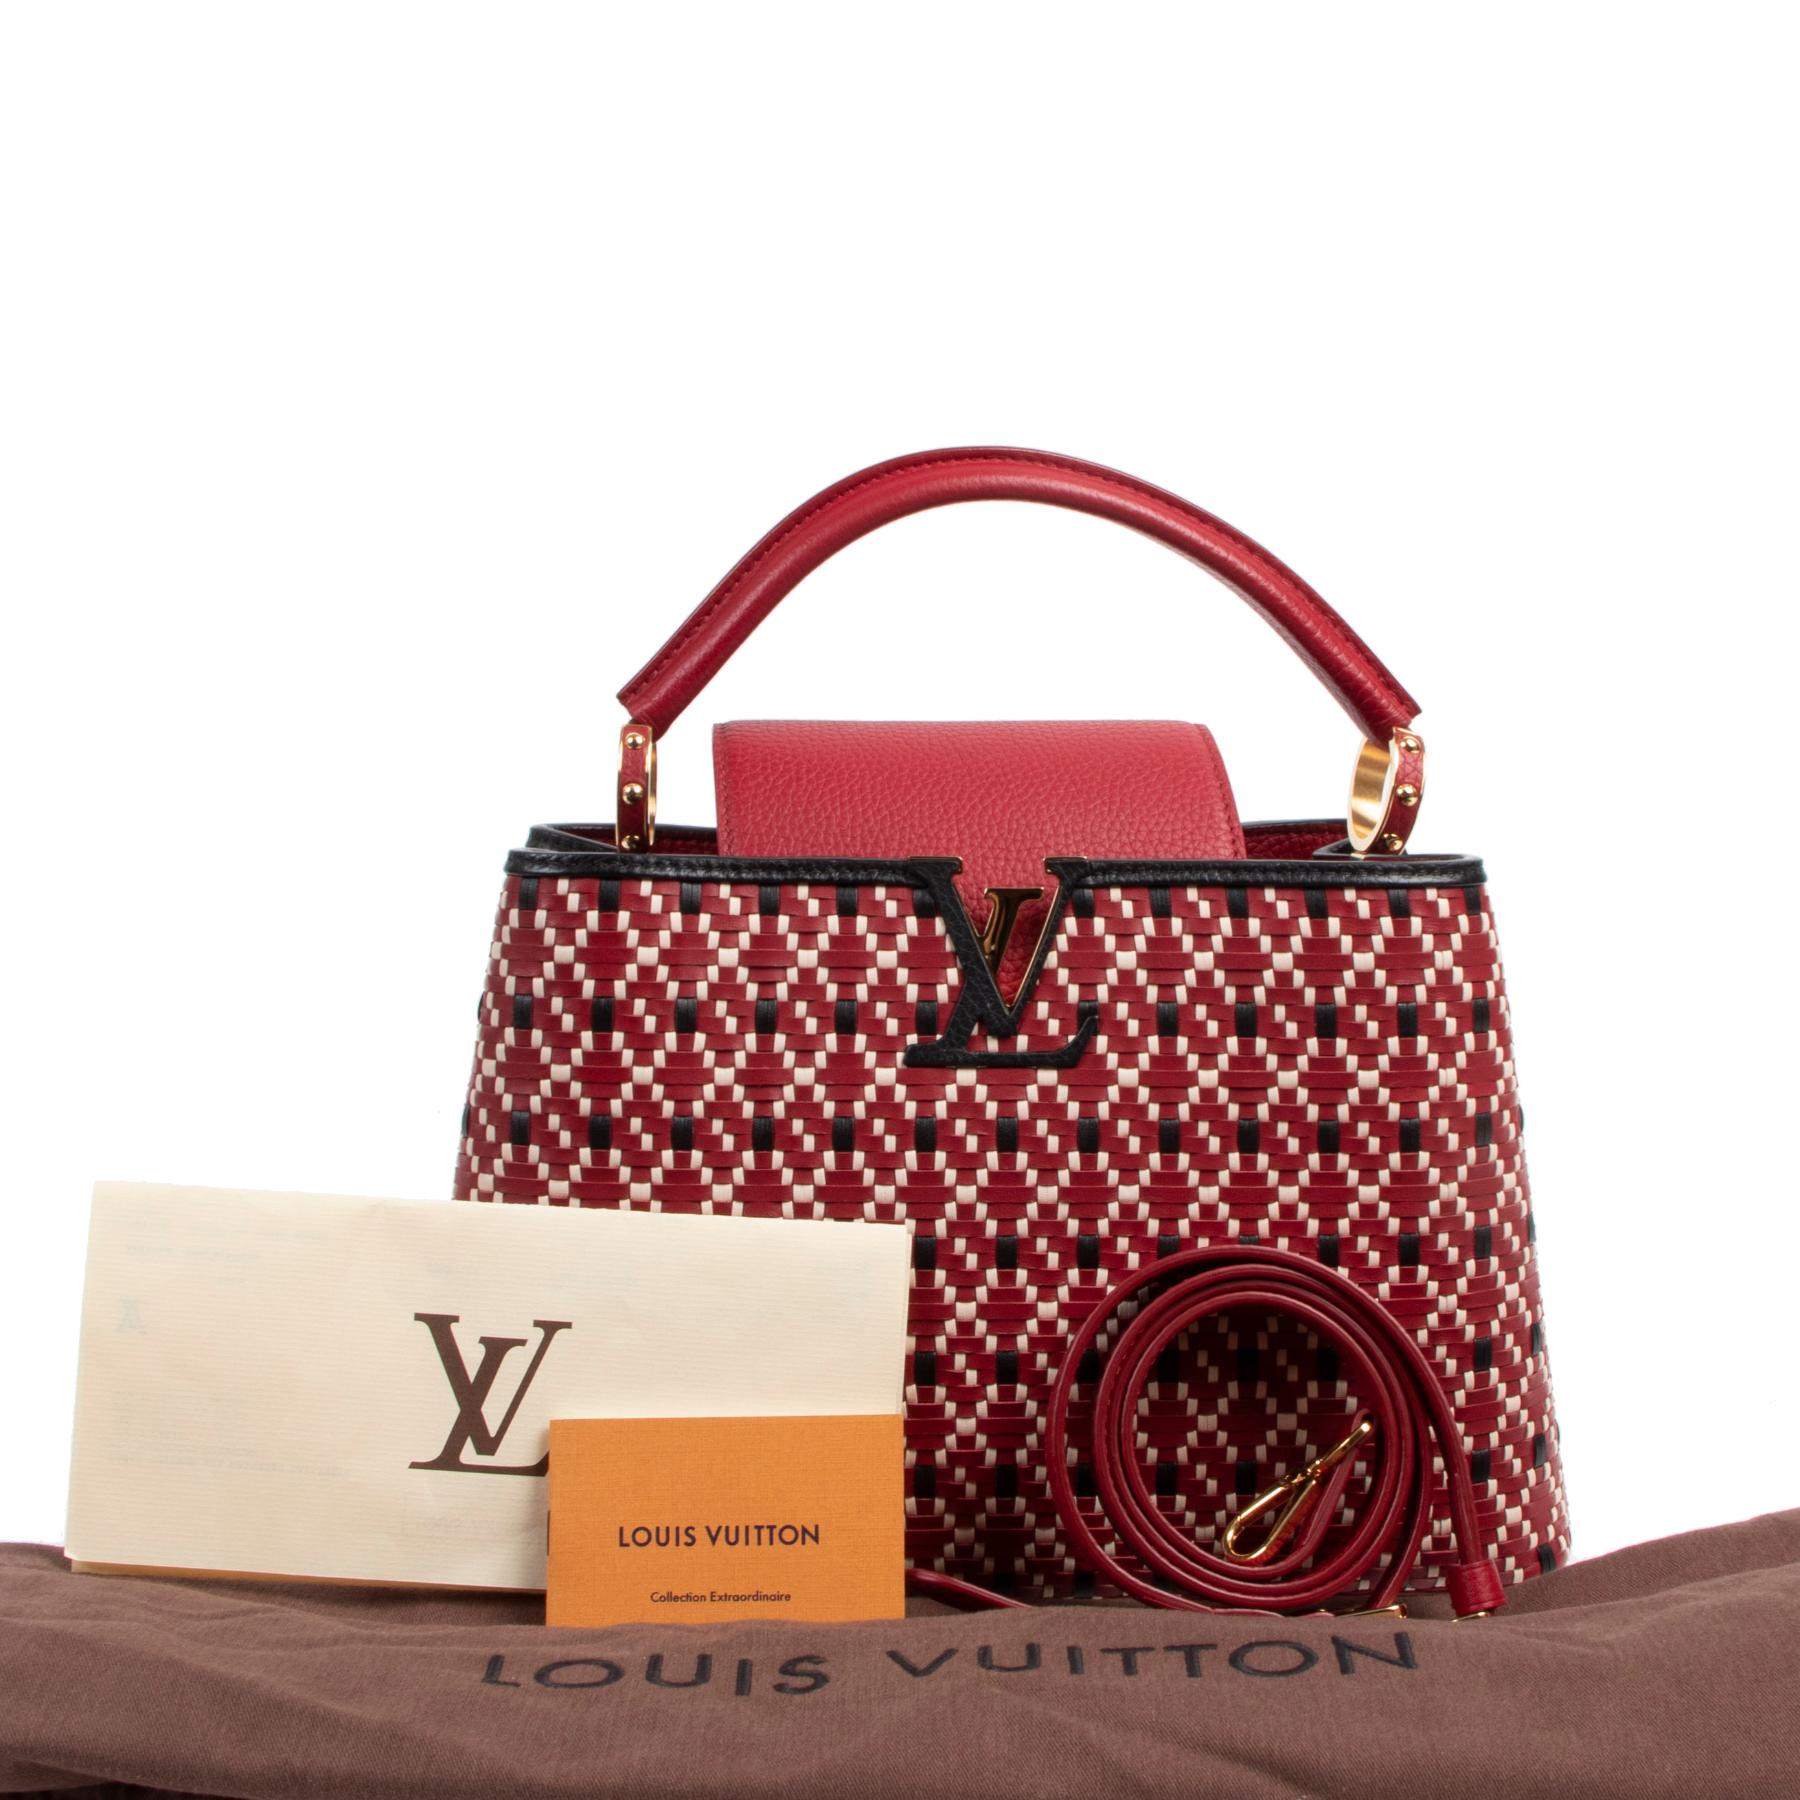 Excellent condition 

Louis Vuitton Capucines PM Twiny Rouge Bag 

This imited edition bag from Louis Vuitton is truly a piece of art you won't regret buying. The Capucines handbag features a flap that can be worn inside the bag to showcase the